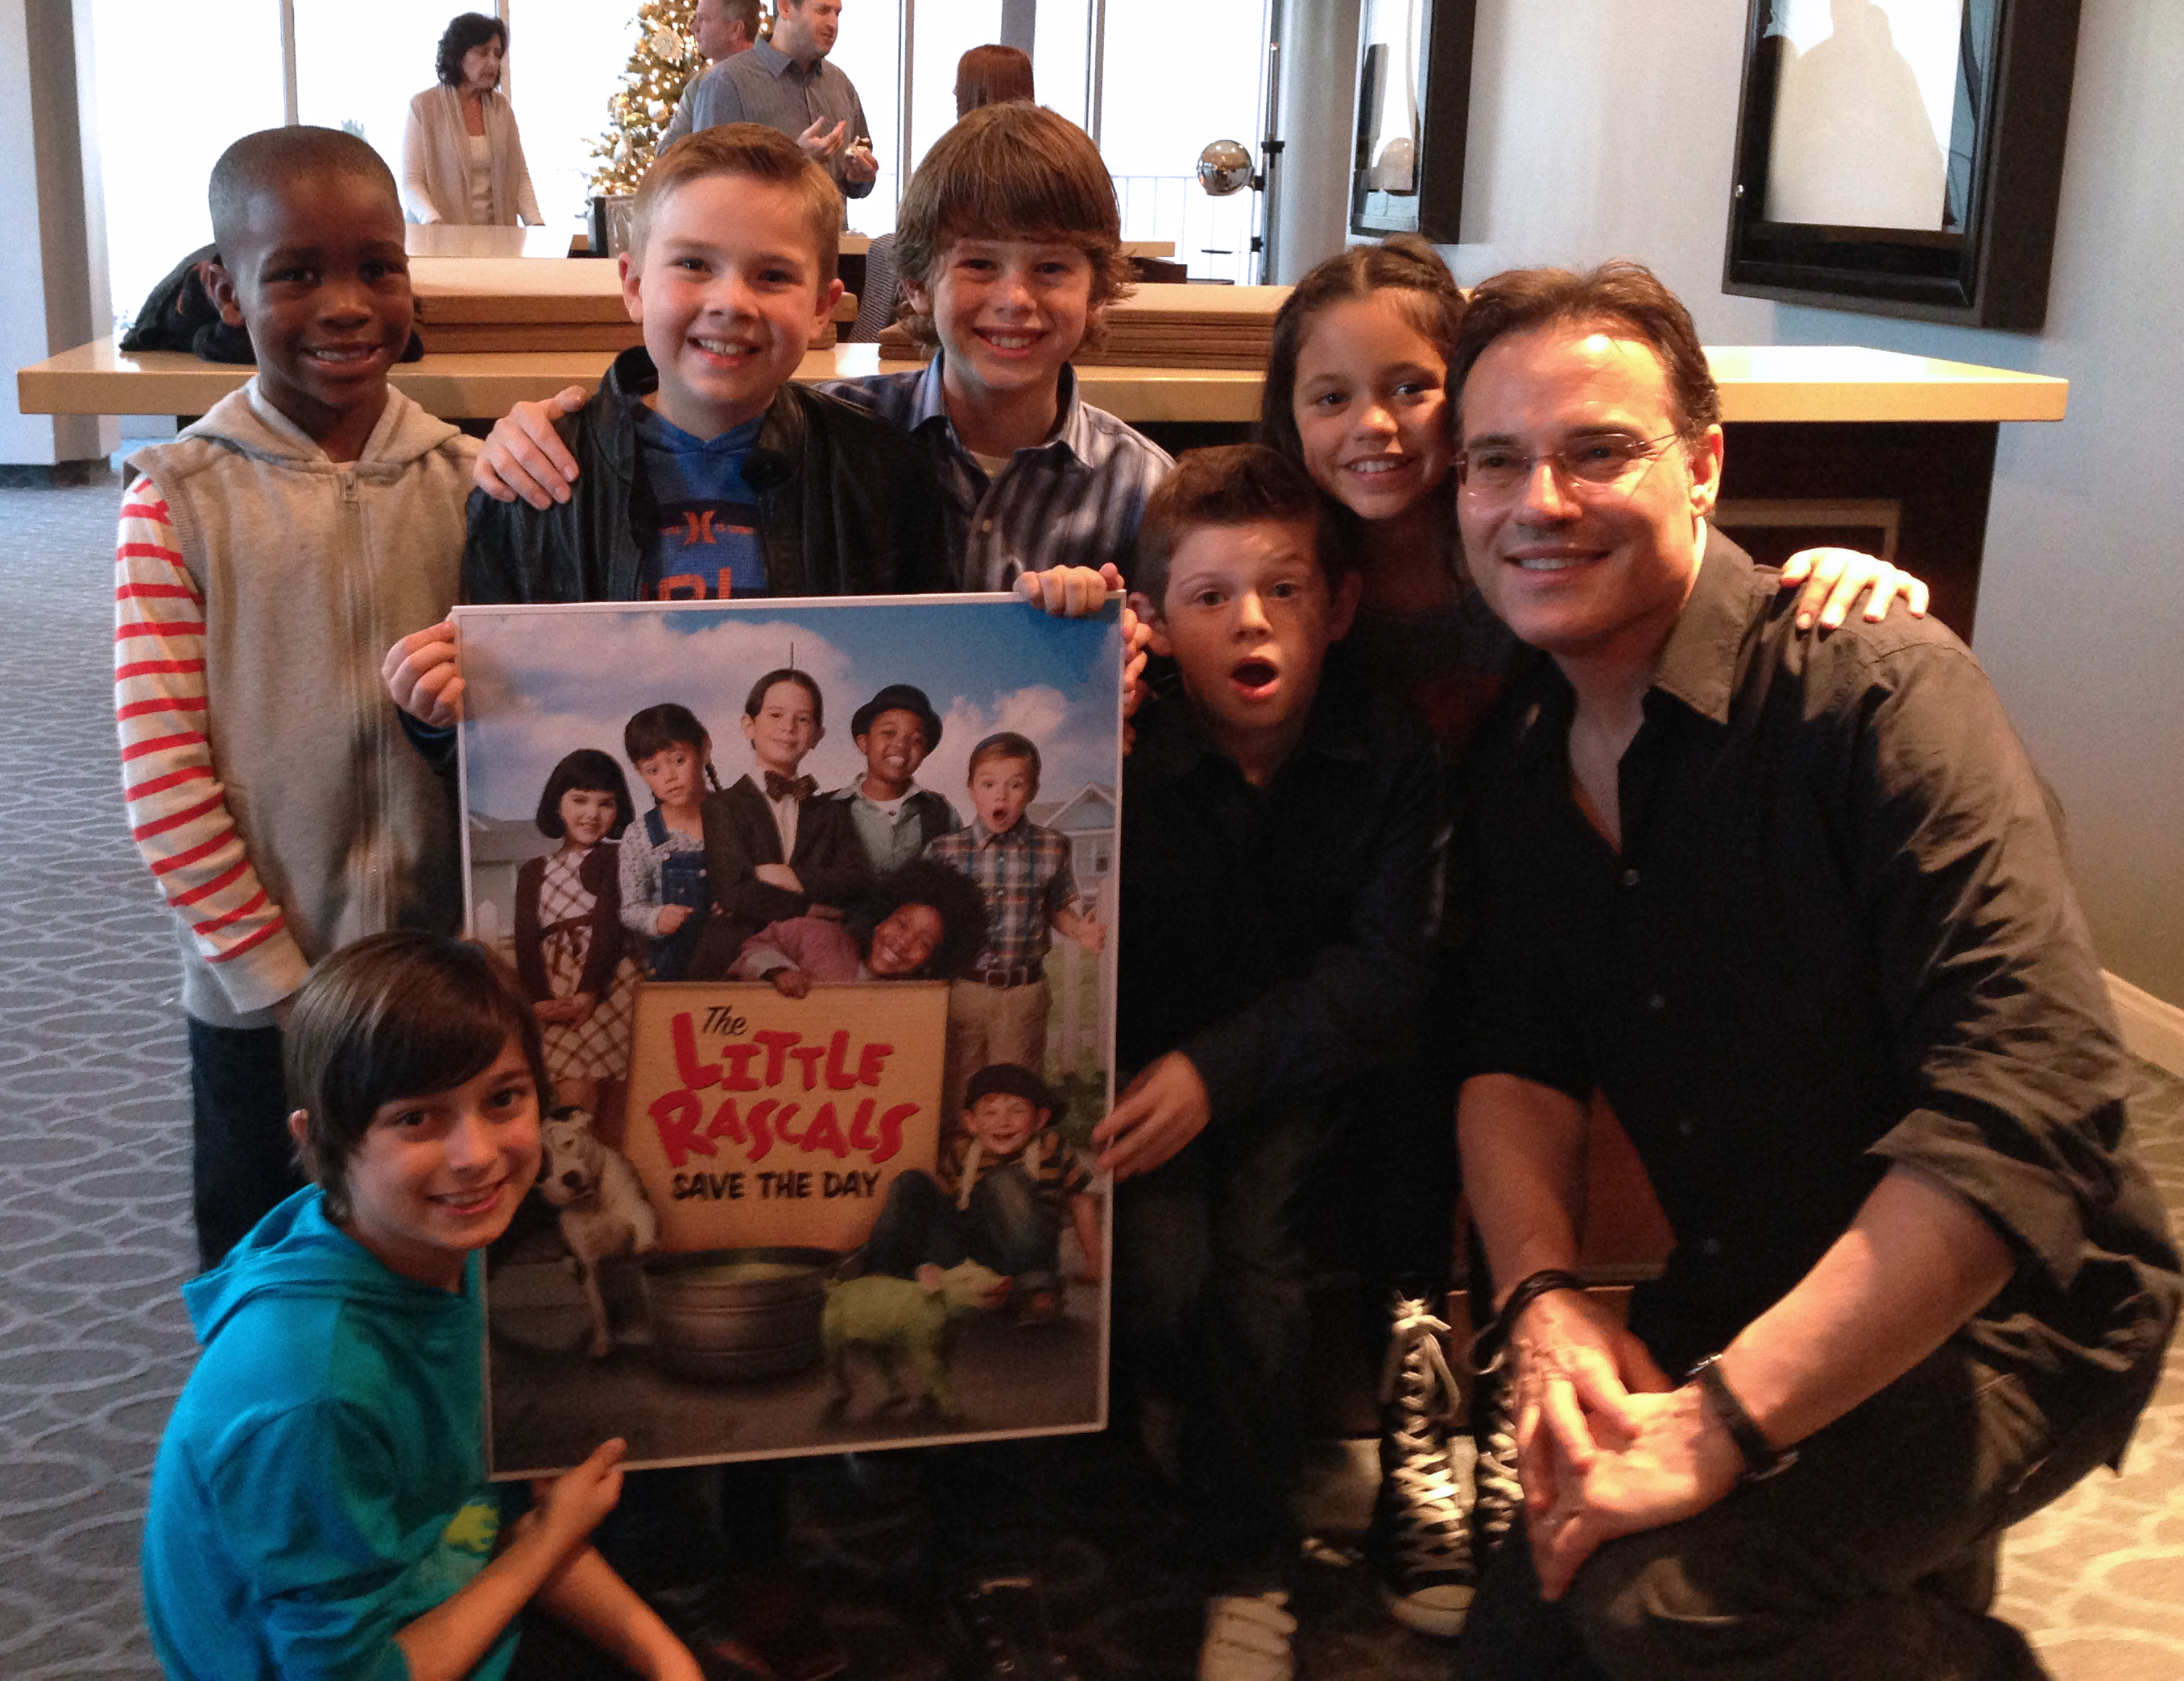 Drew Justice with cast of Little Rascals and Director Alex Zamm